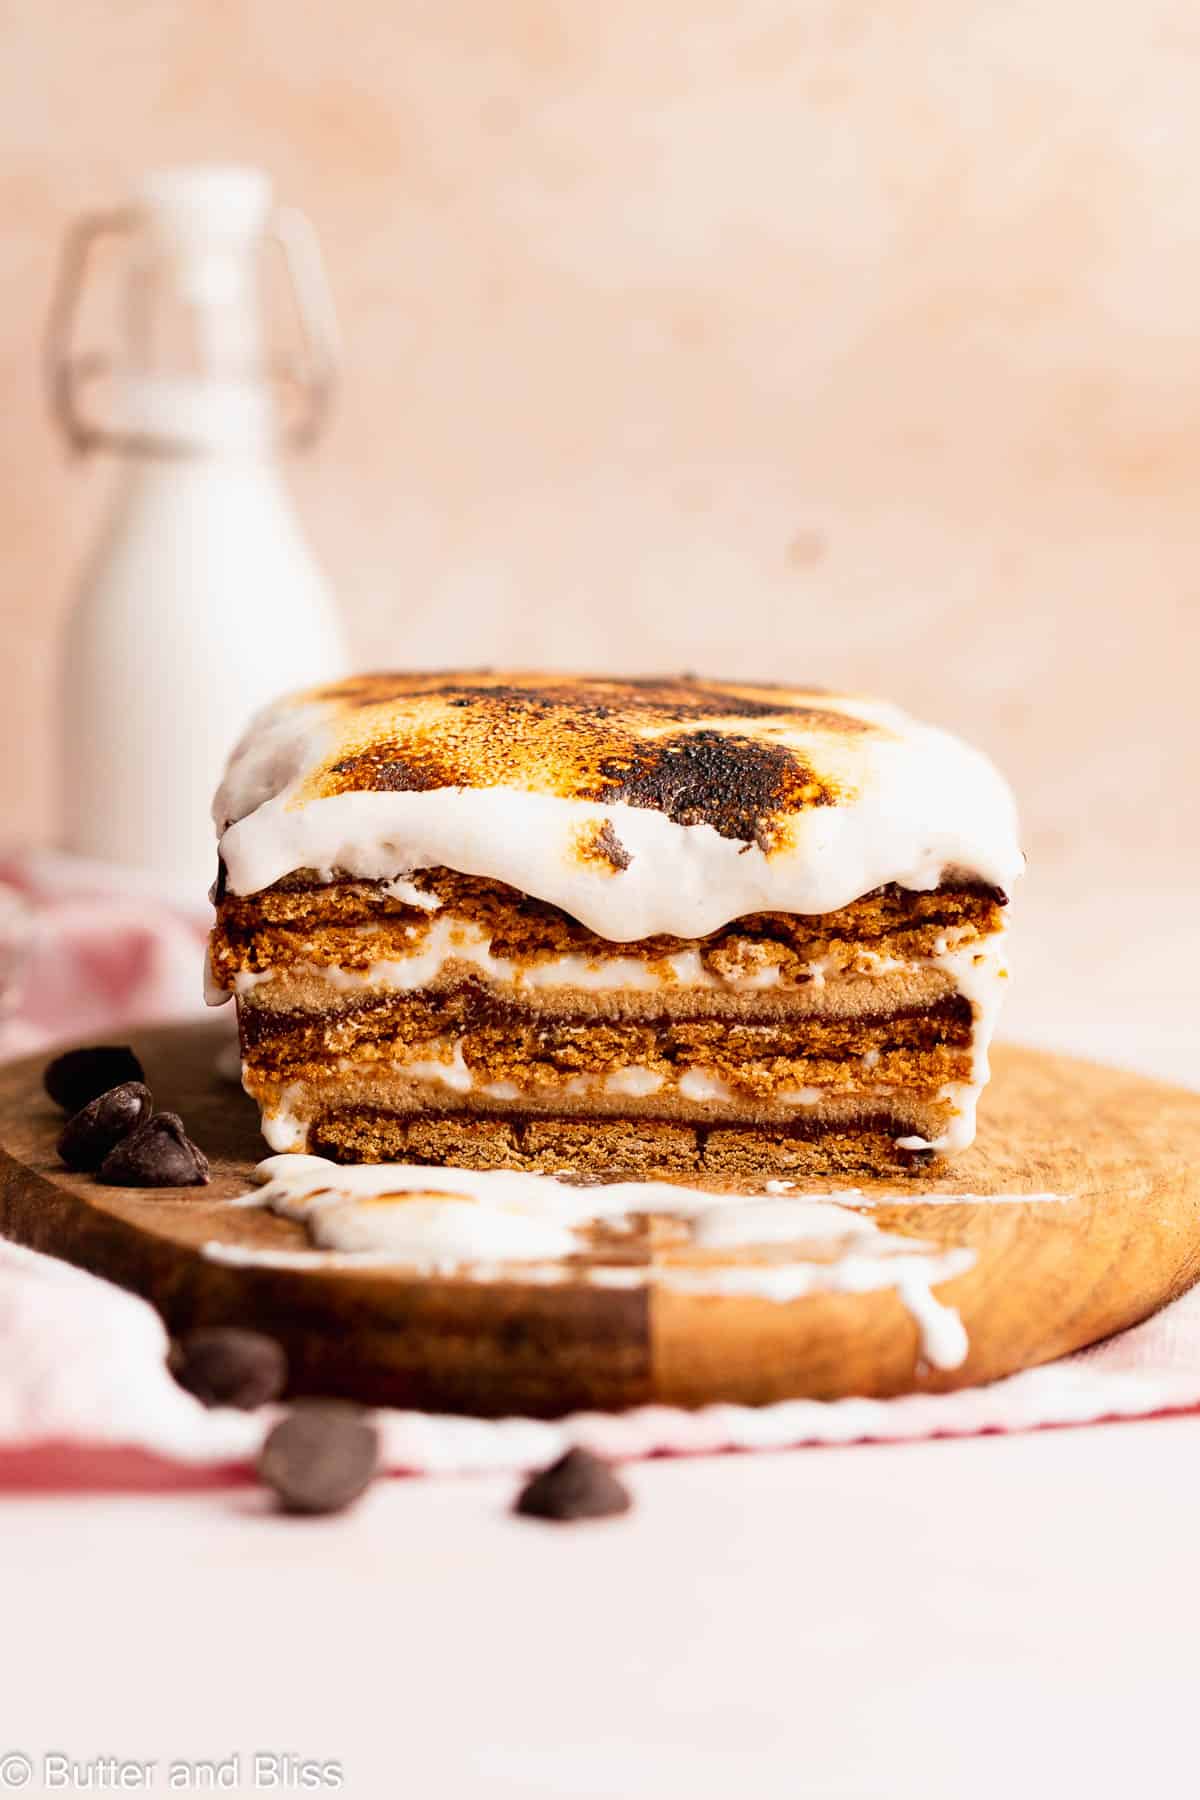 View of the delicious layers inside a gluten free peanut butter s'mores icebox cake.